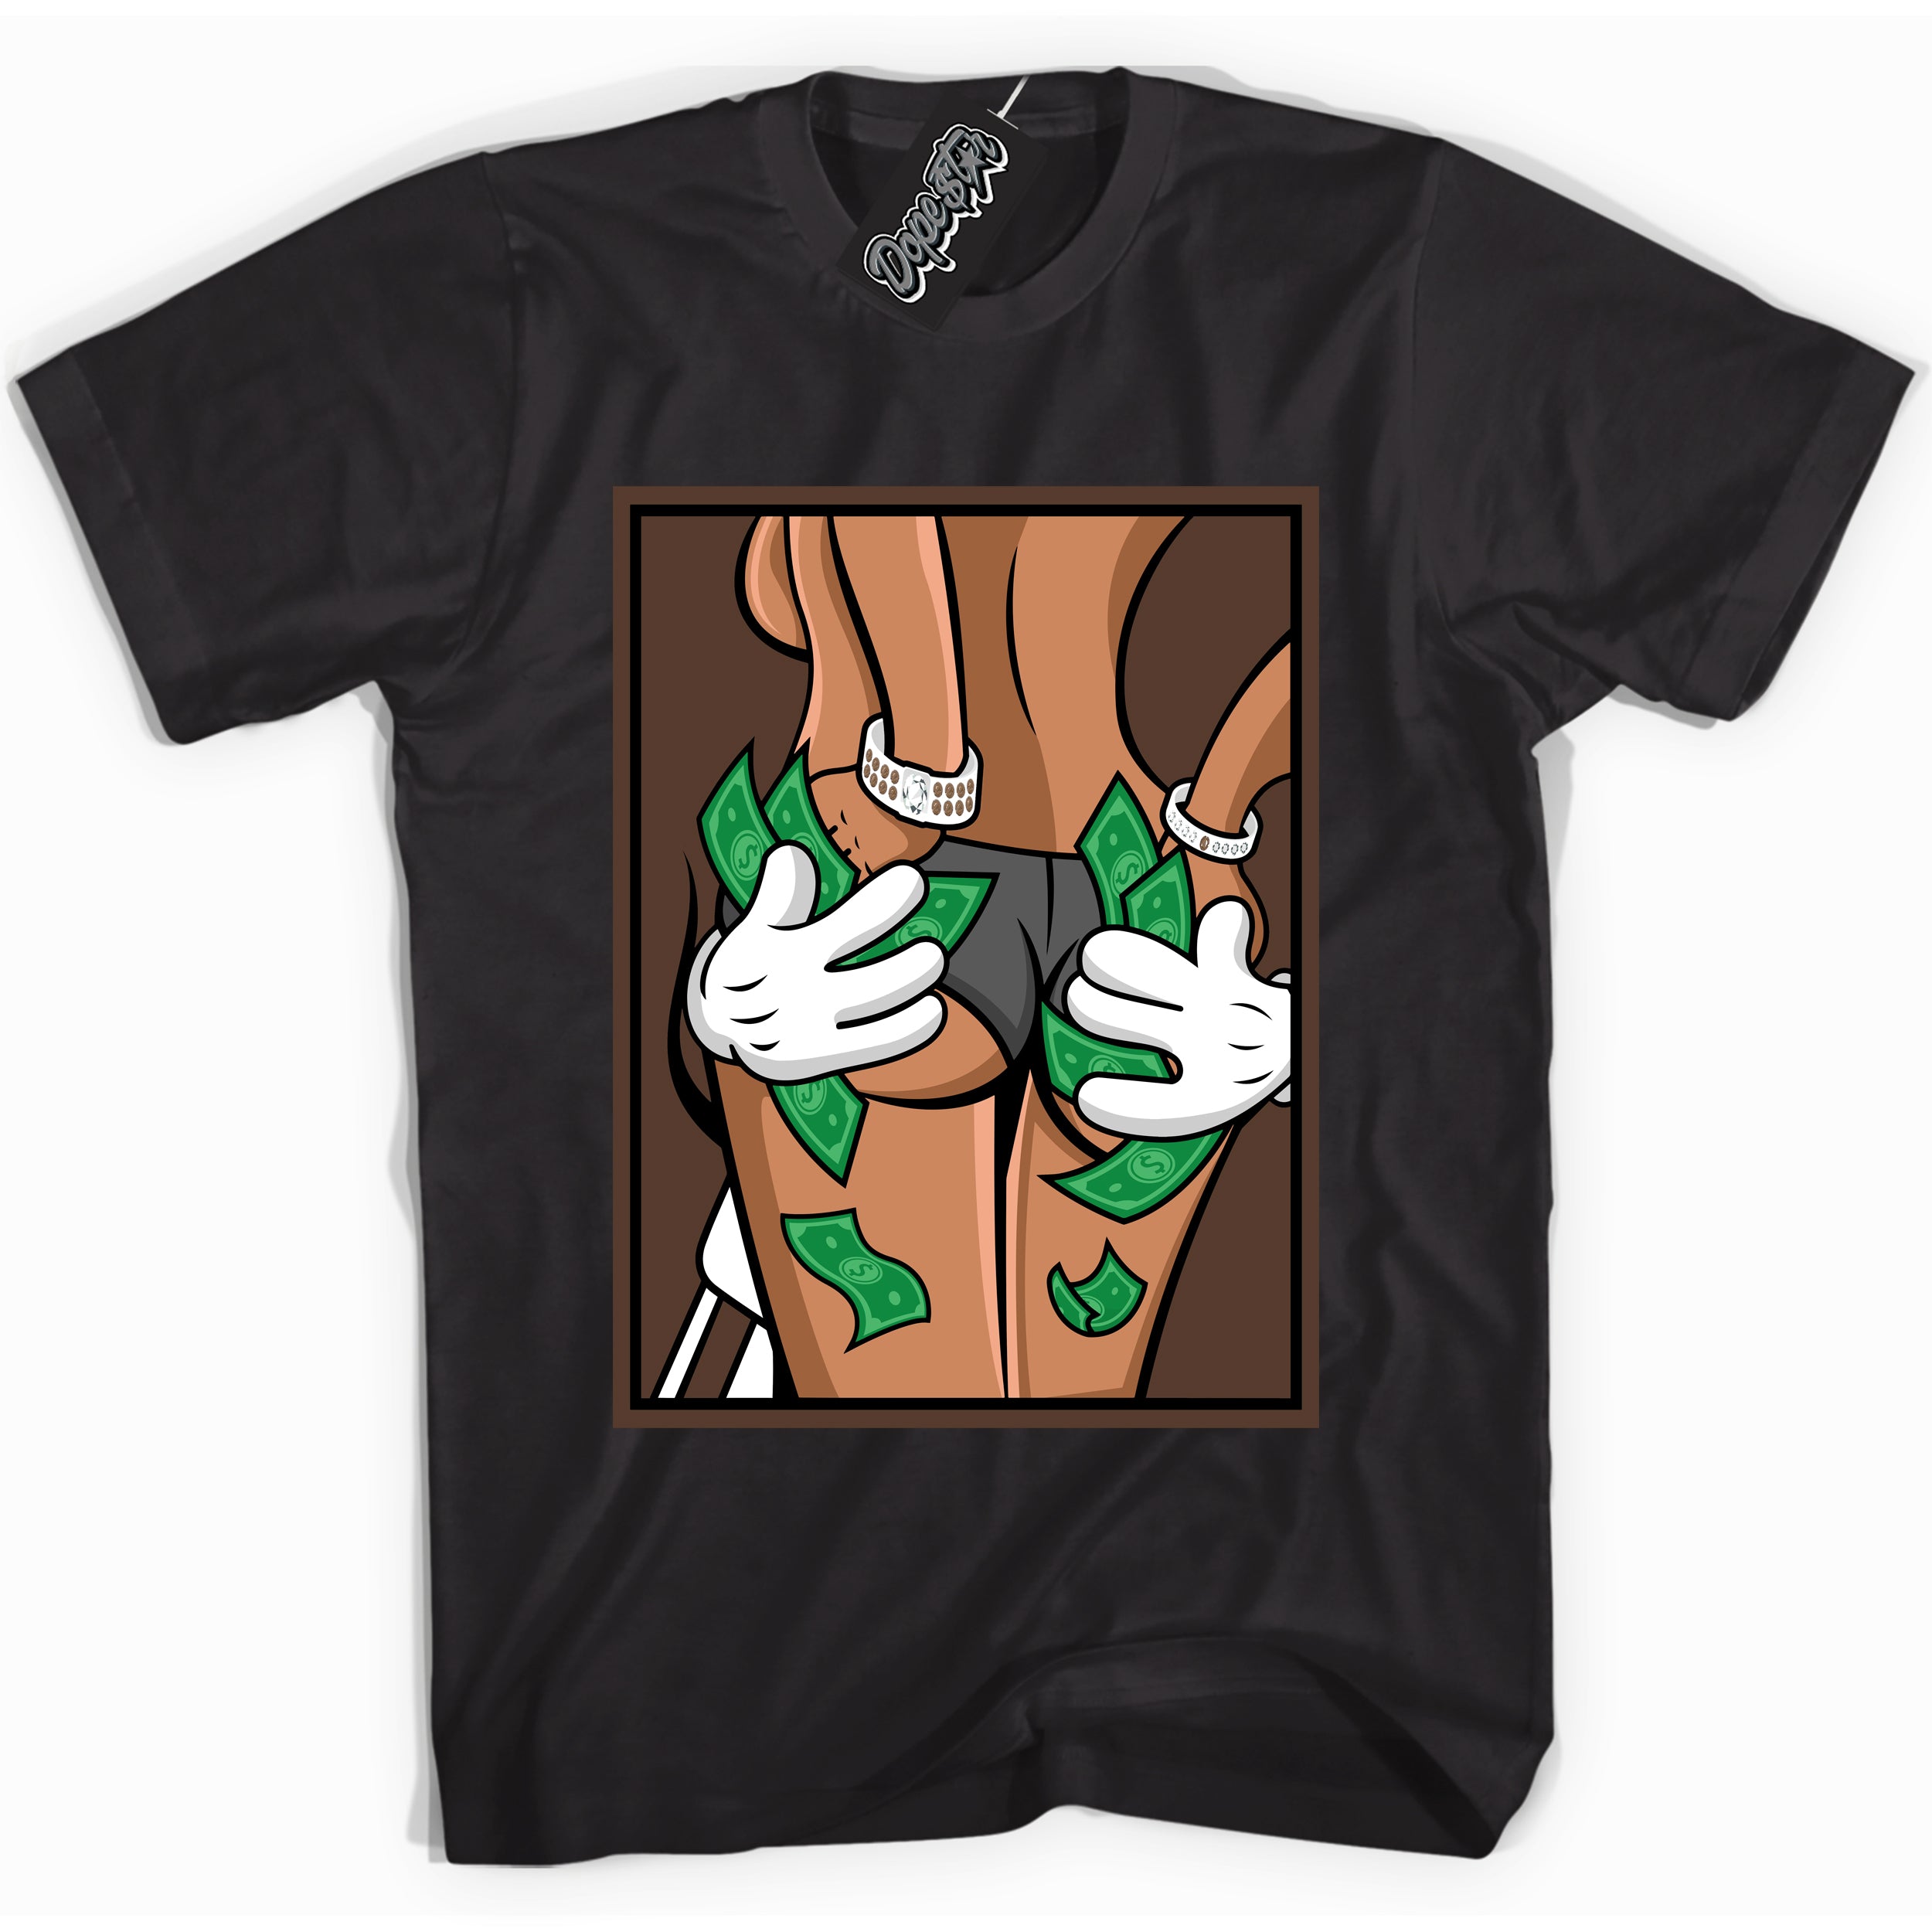 Cool Black graphic tee with “ Money Hands ” design, that perfectly matches Palomino 1s sneakers 